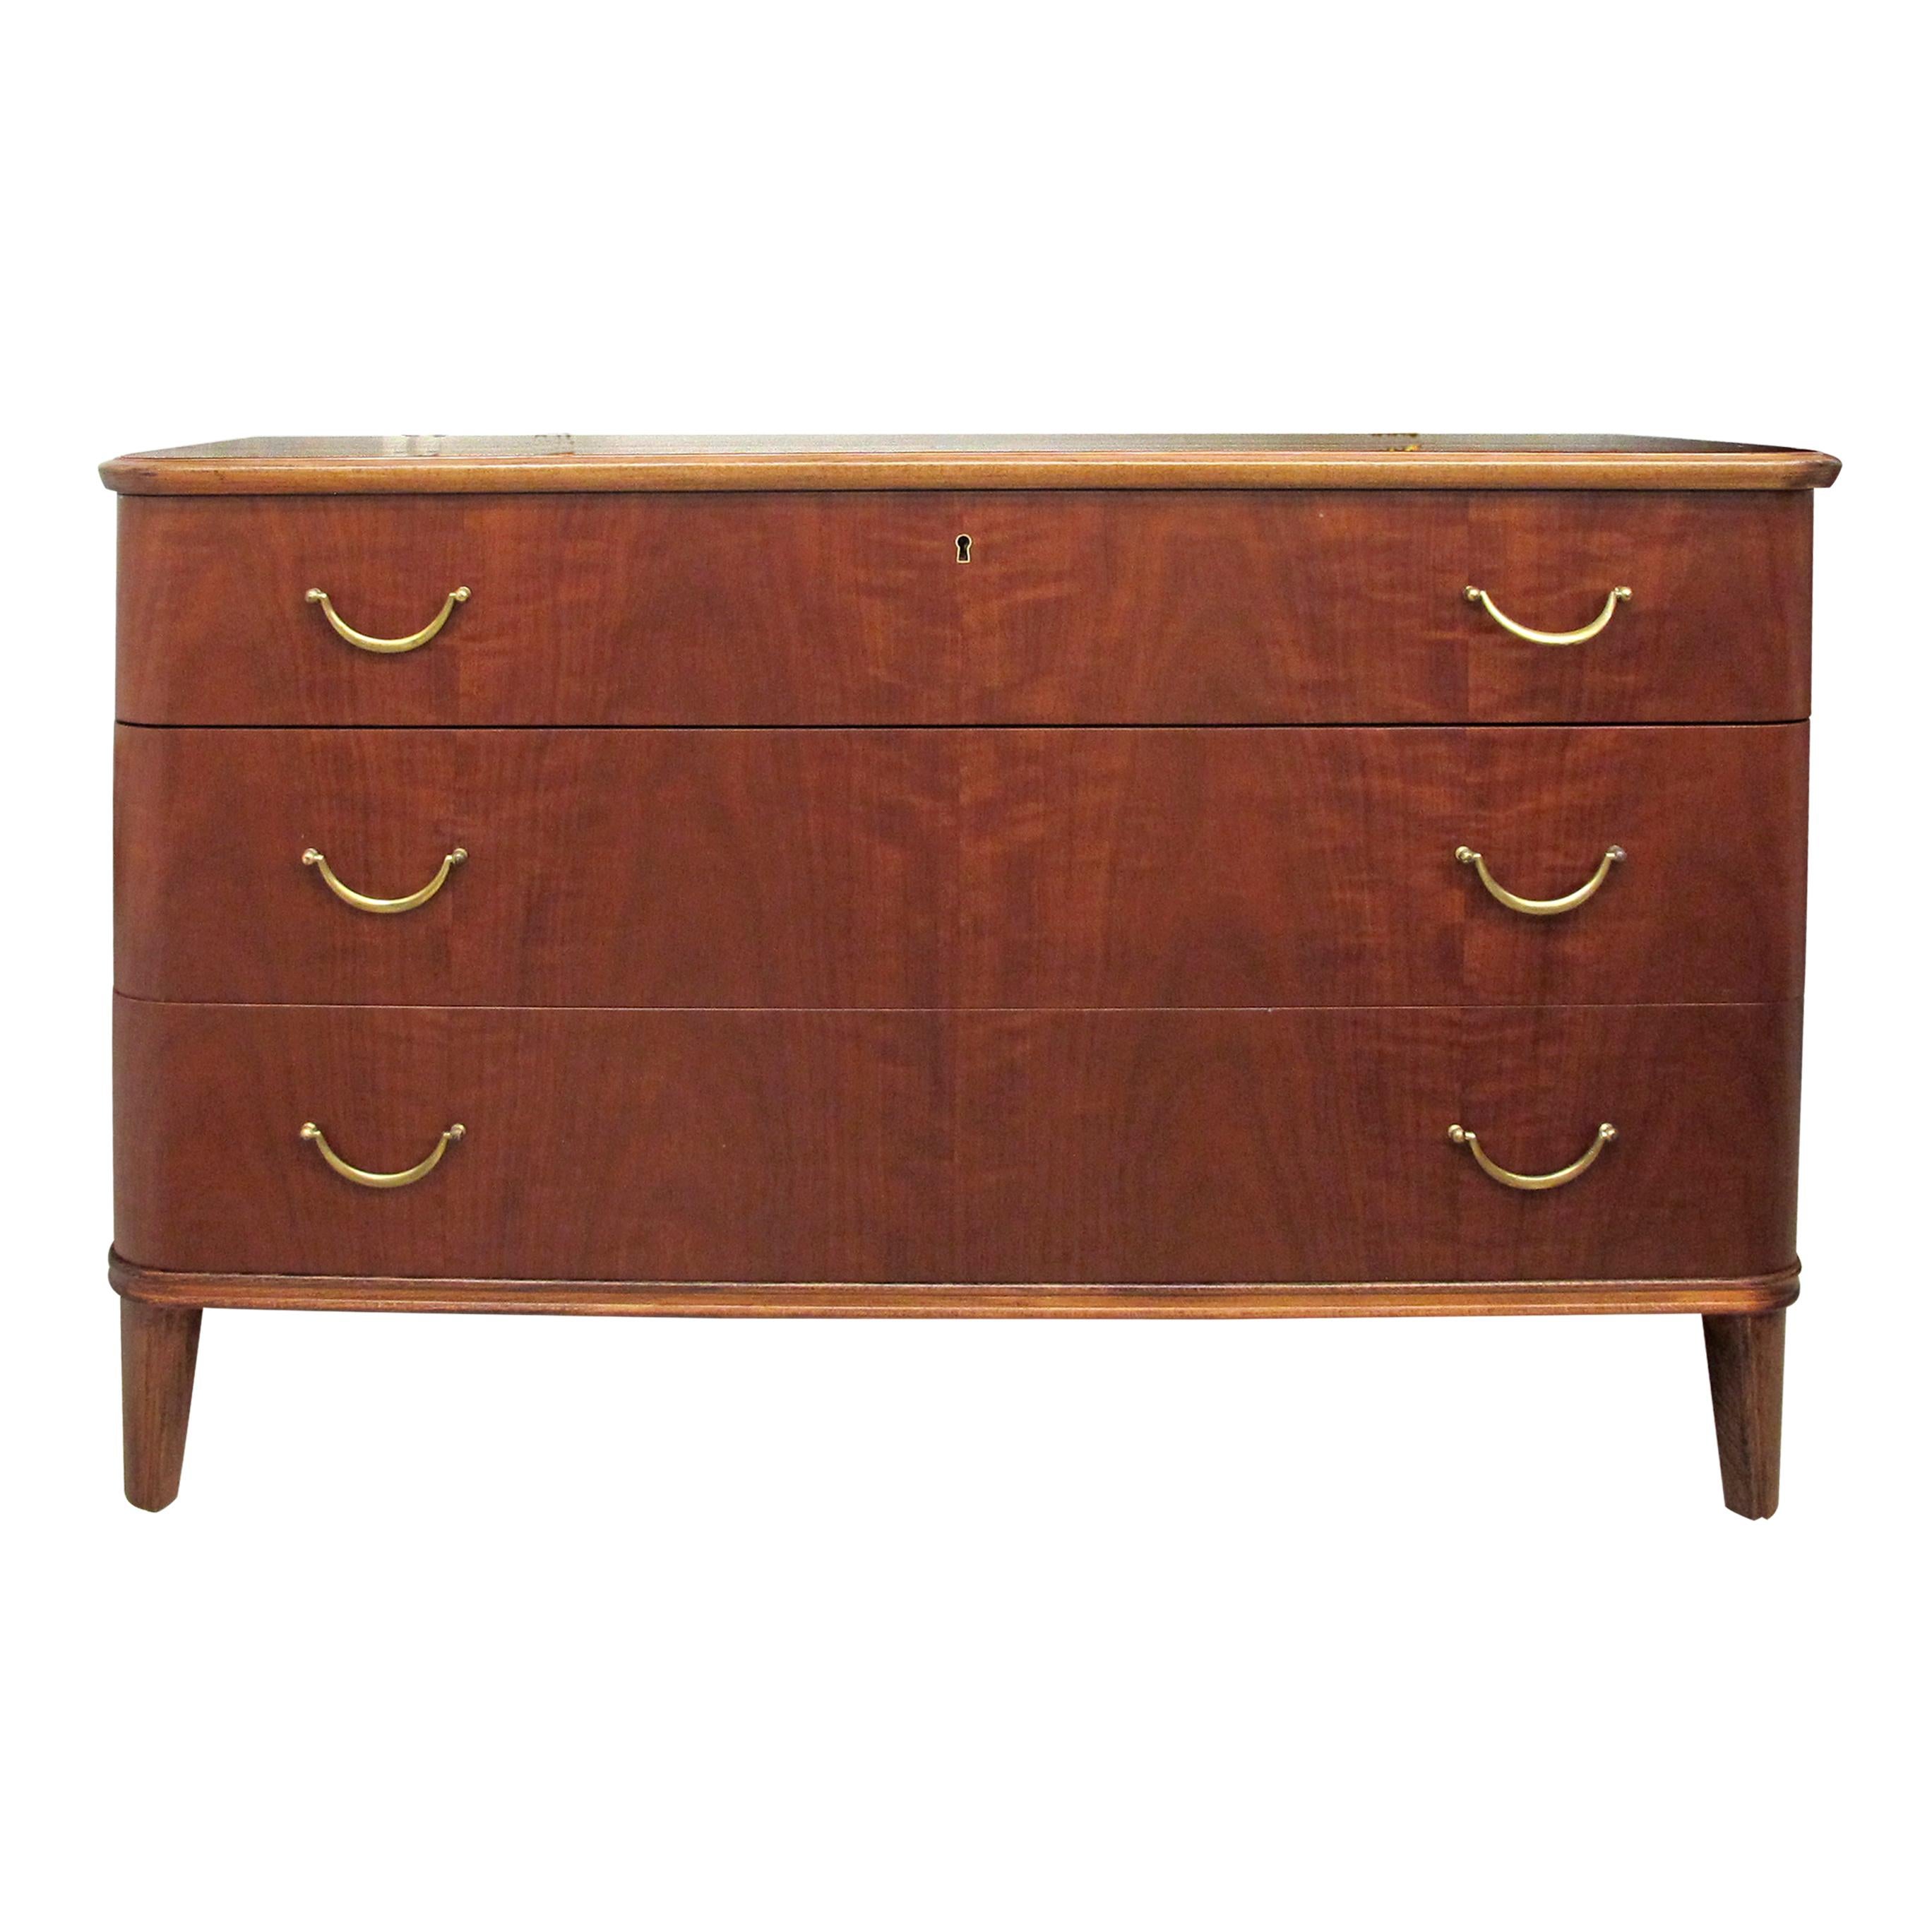 Functionality is a key aspect of this 1940s Swedish chest of drawers. The design provides ample storage space to fulfil your organizational needs while maintaining a streamlined and uncluttered appearance. The dresser features three spacious drawers